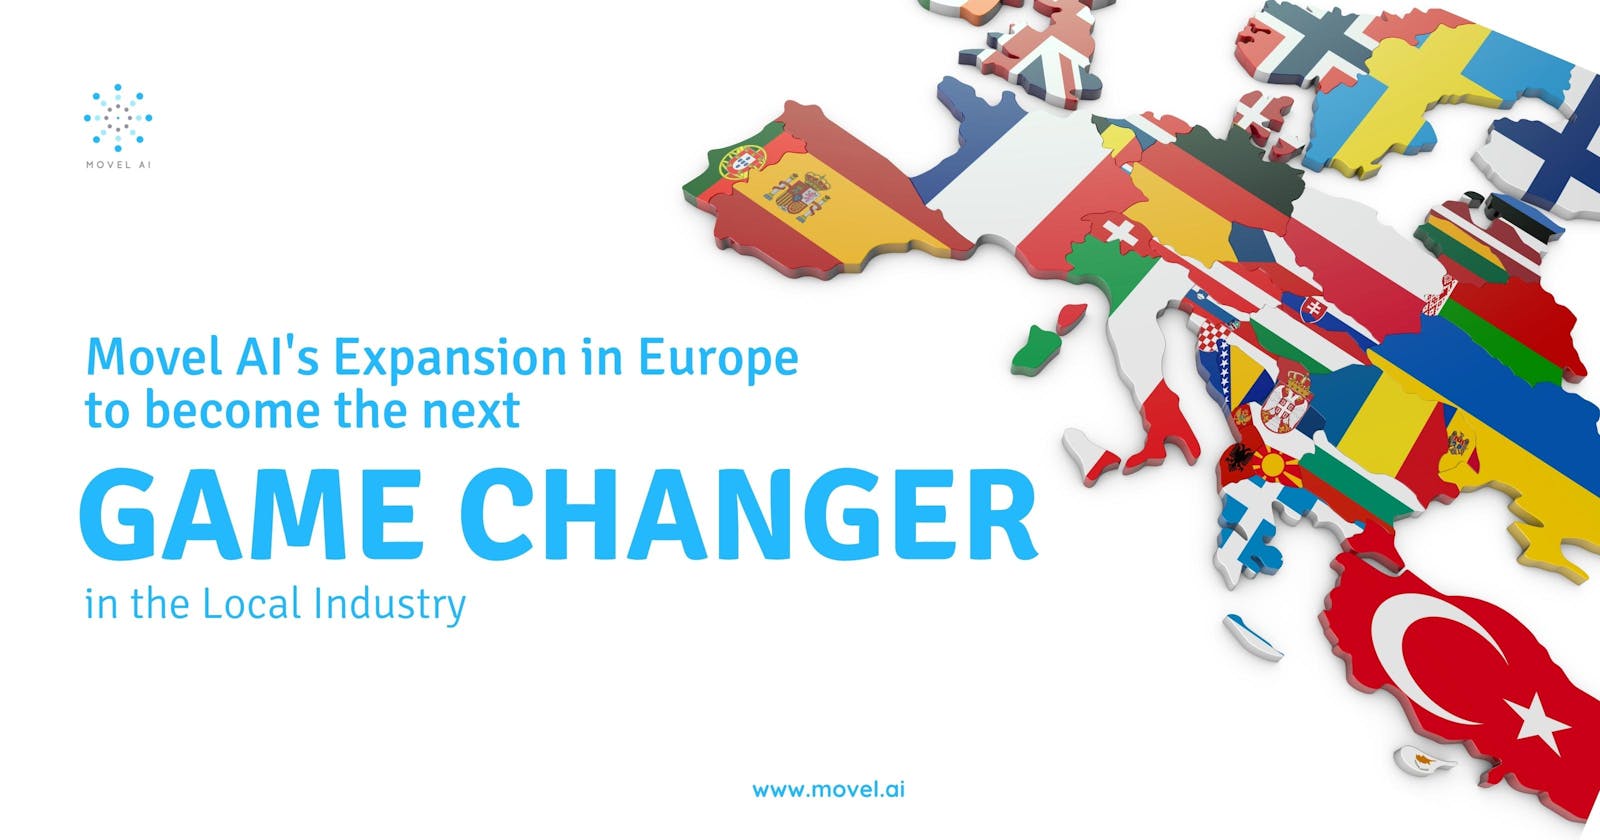 Movel AI's Expansion in Europe to Become the Next Game Changer in the Local Industry